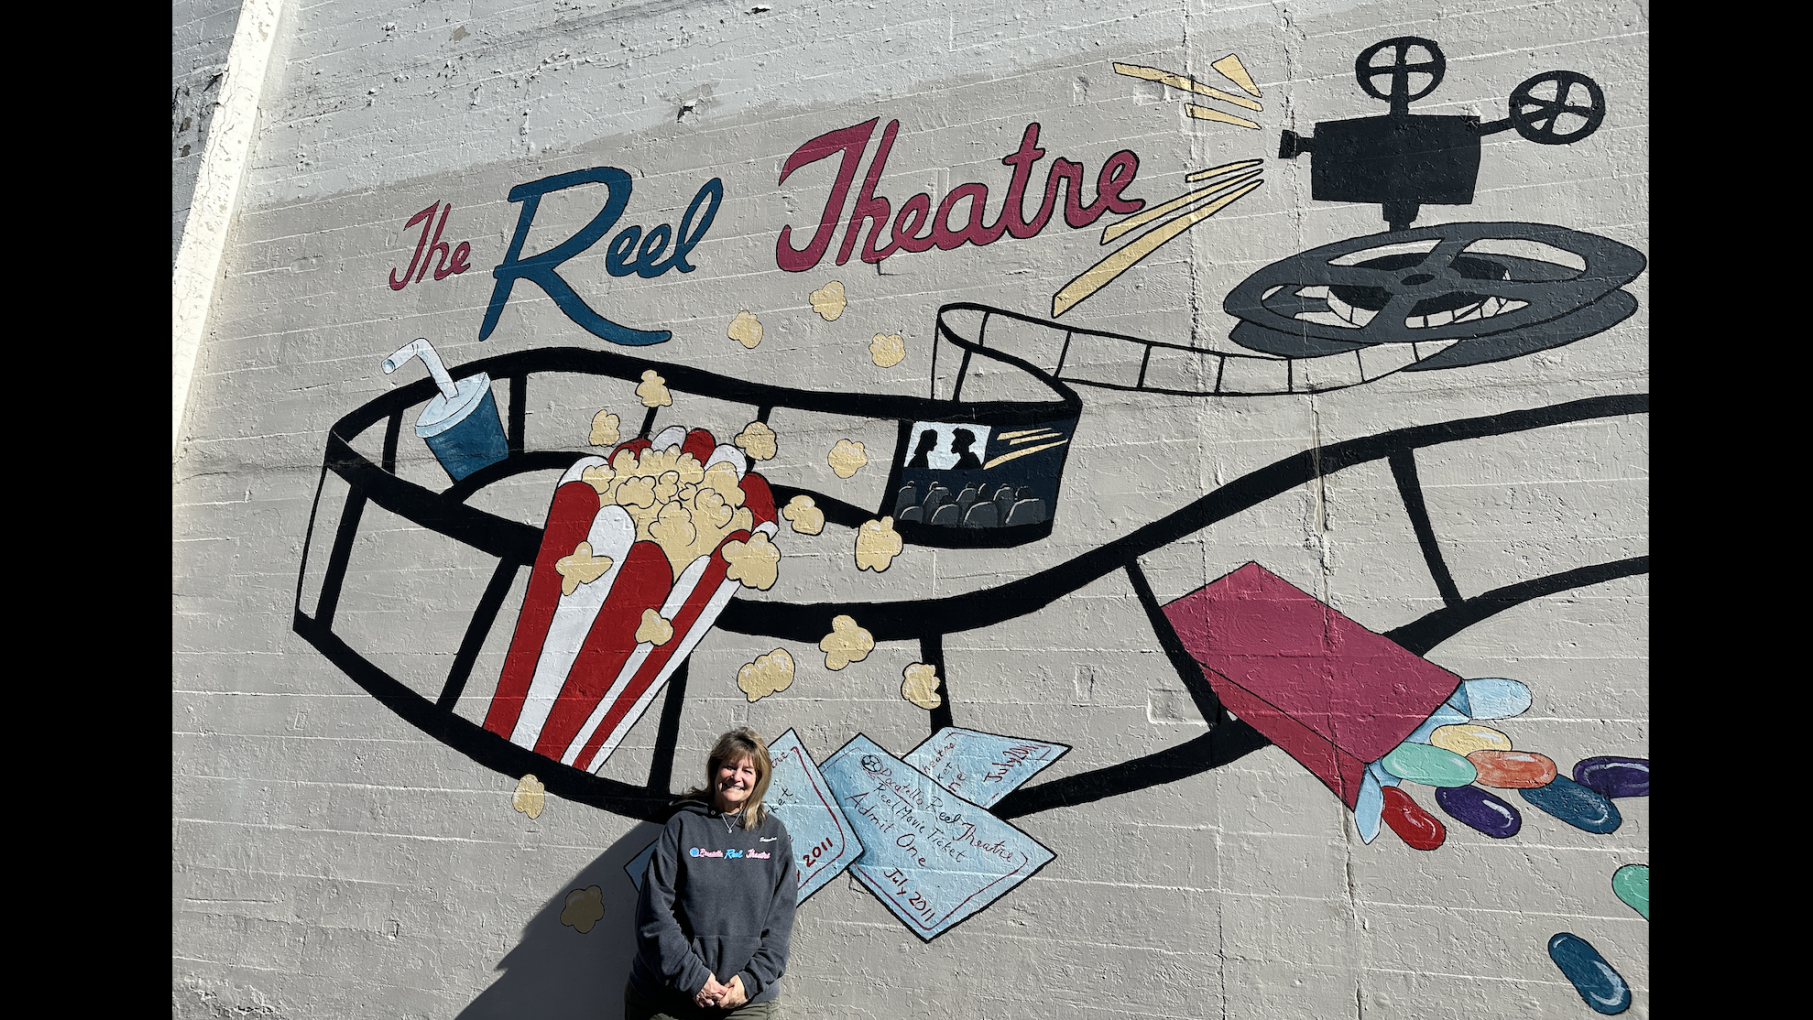 Pocatello's Reel Theatre going strong in digital and streaming age, Local